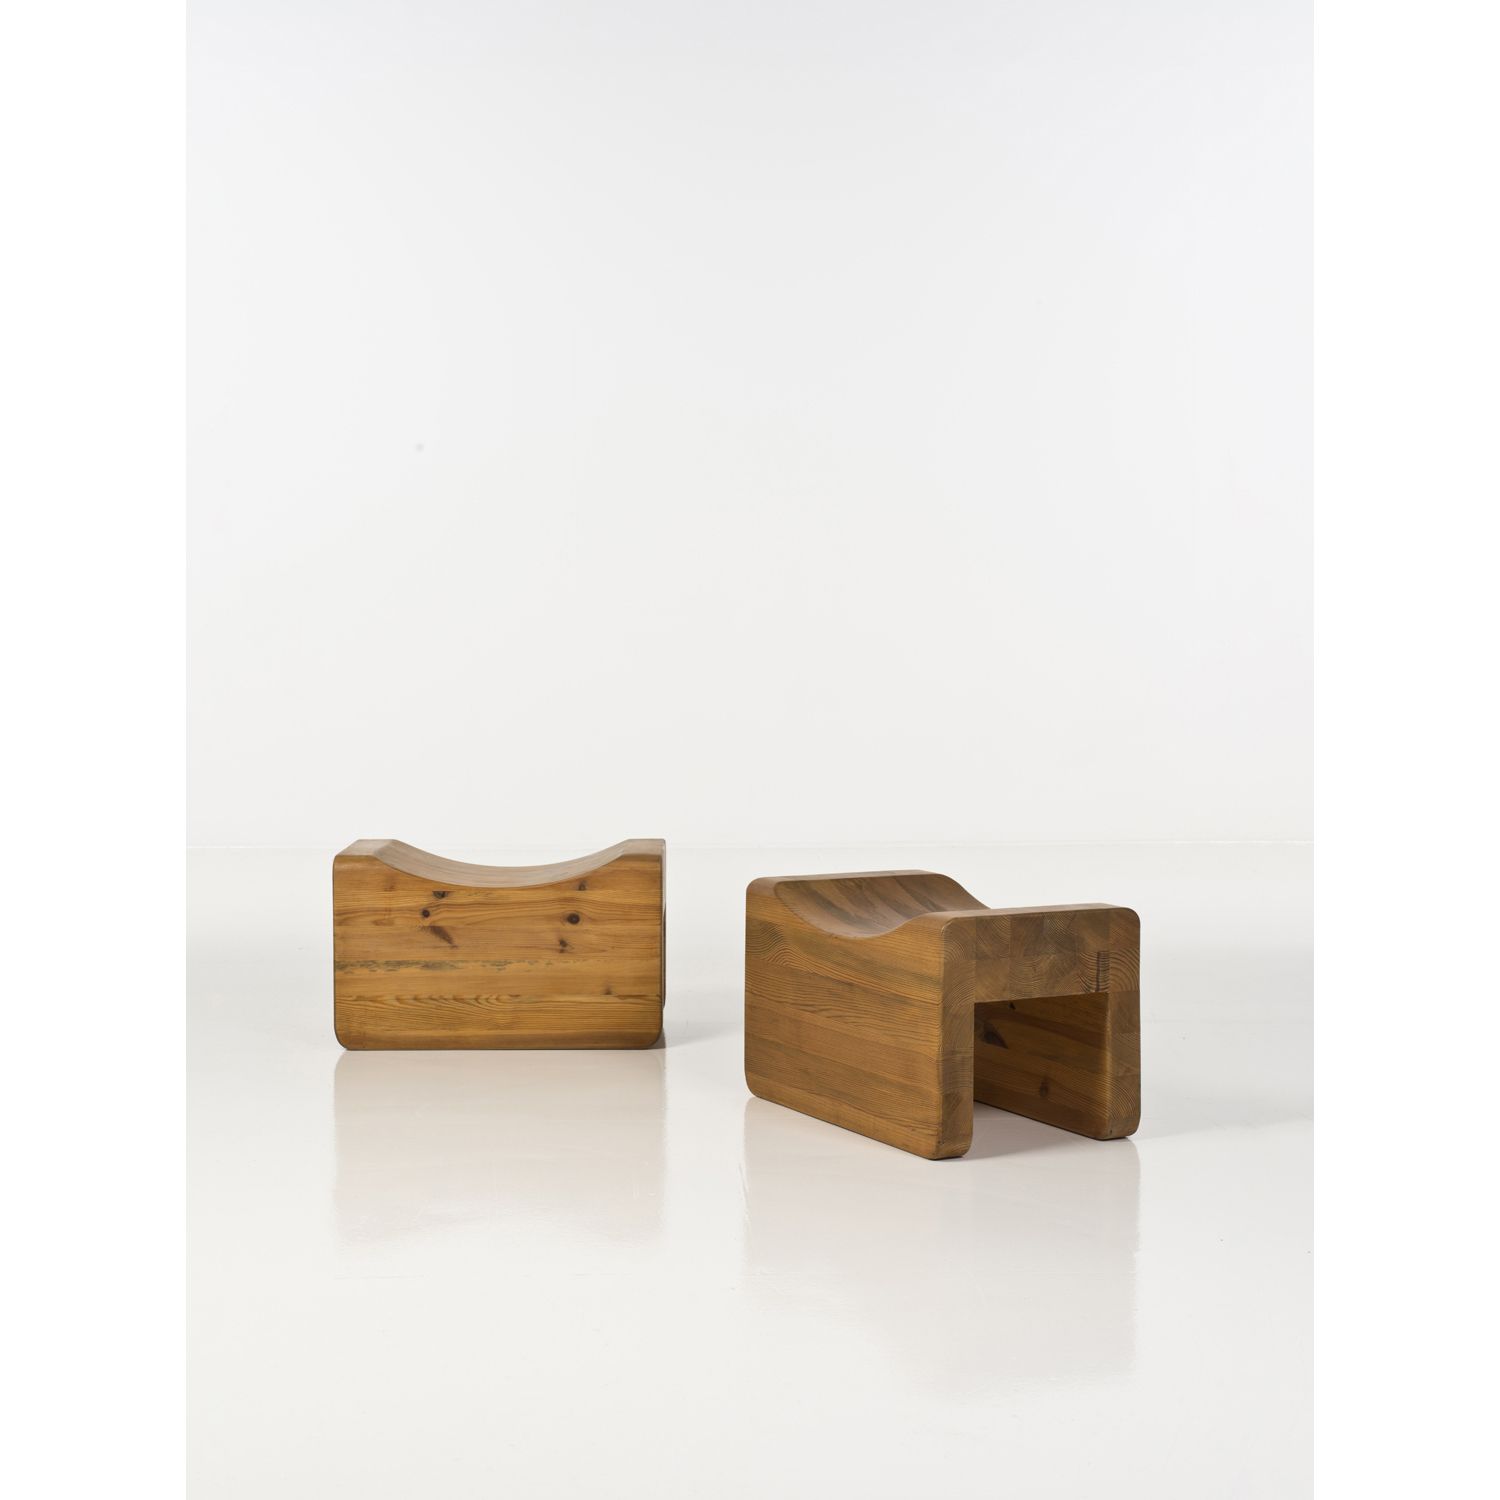 Null Axel Einar Hjorth (1888-1959)

Pair of stools

Pine wood

Edited by NK Nord&hellip;